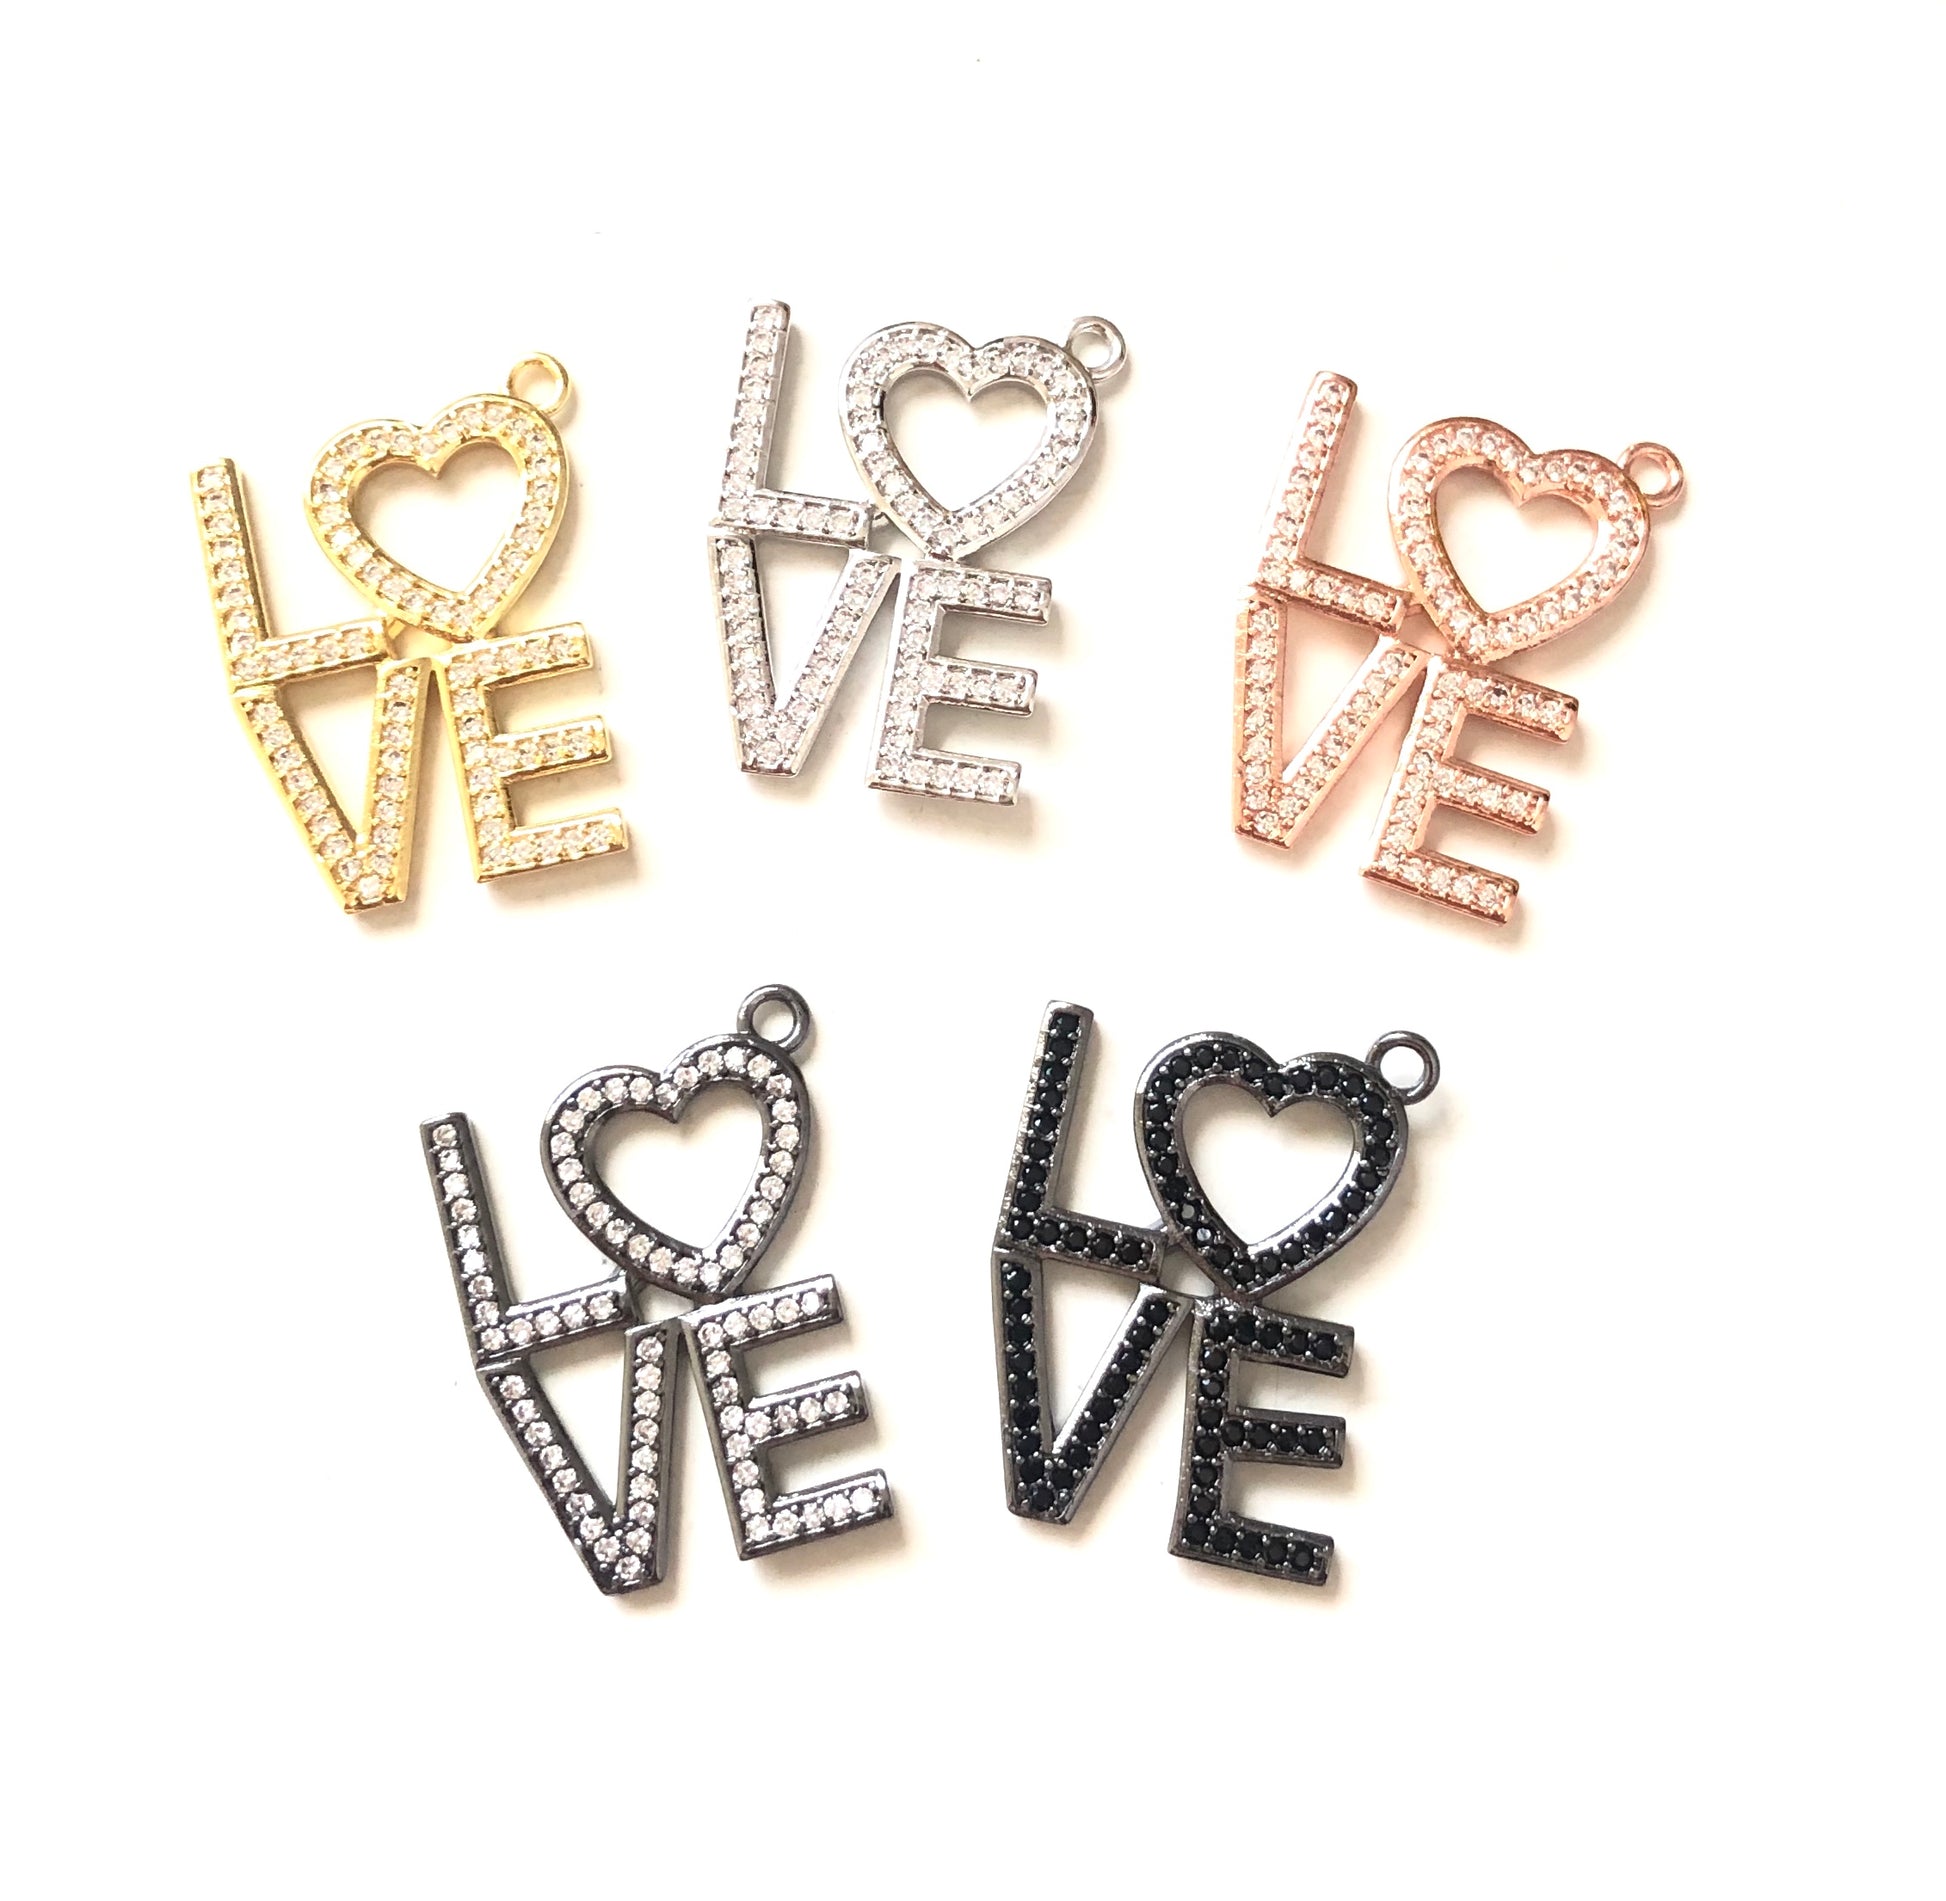 10pcs/lot 25*20mm CZ Paved LOVE Charms CZ Paved Charms Love Letters Words & Quotes Charms Beads Beyond